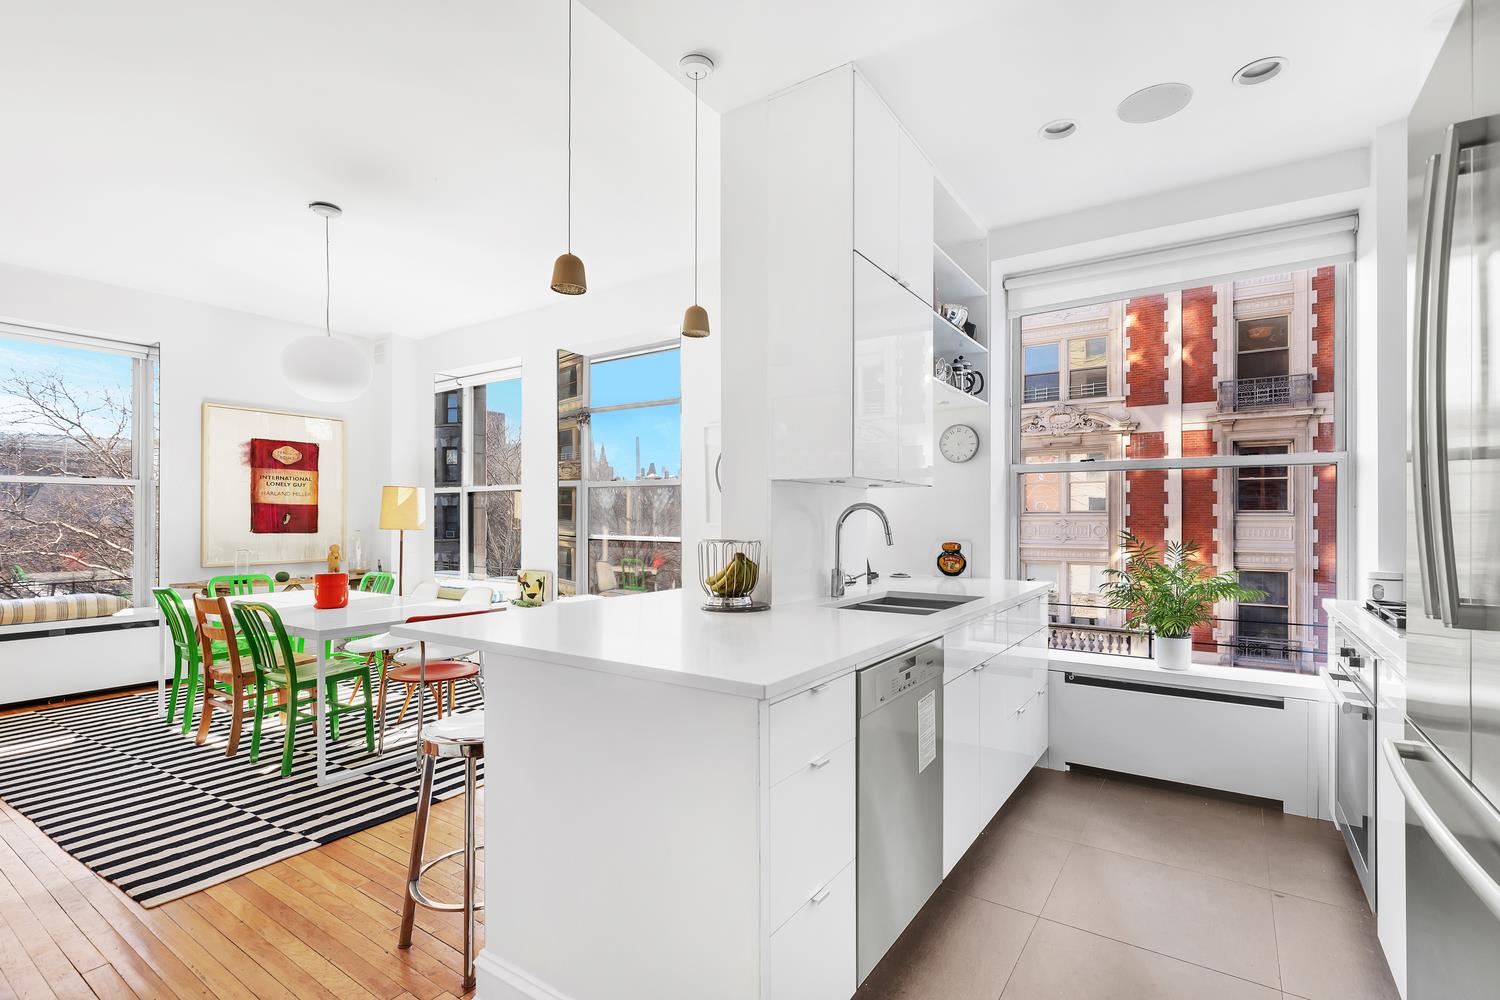 101 West 80th Street 5Bcd, Upper West Side, Upper West Side, NYC - 3 Bedrooms  
2 Bathrooms  
6 Rooms - 